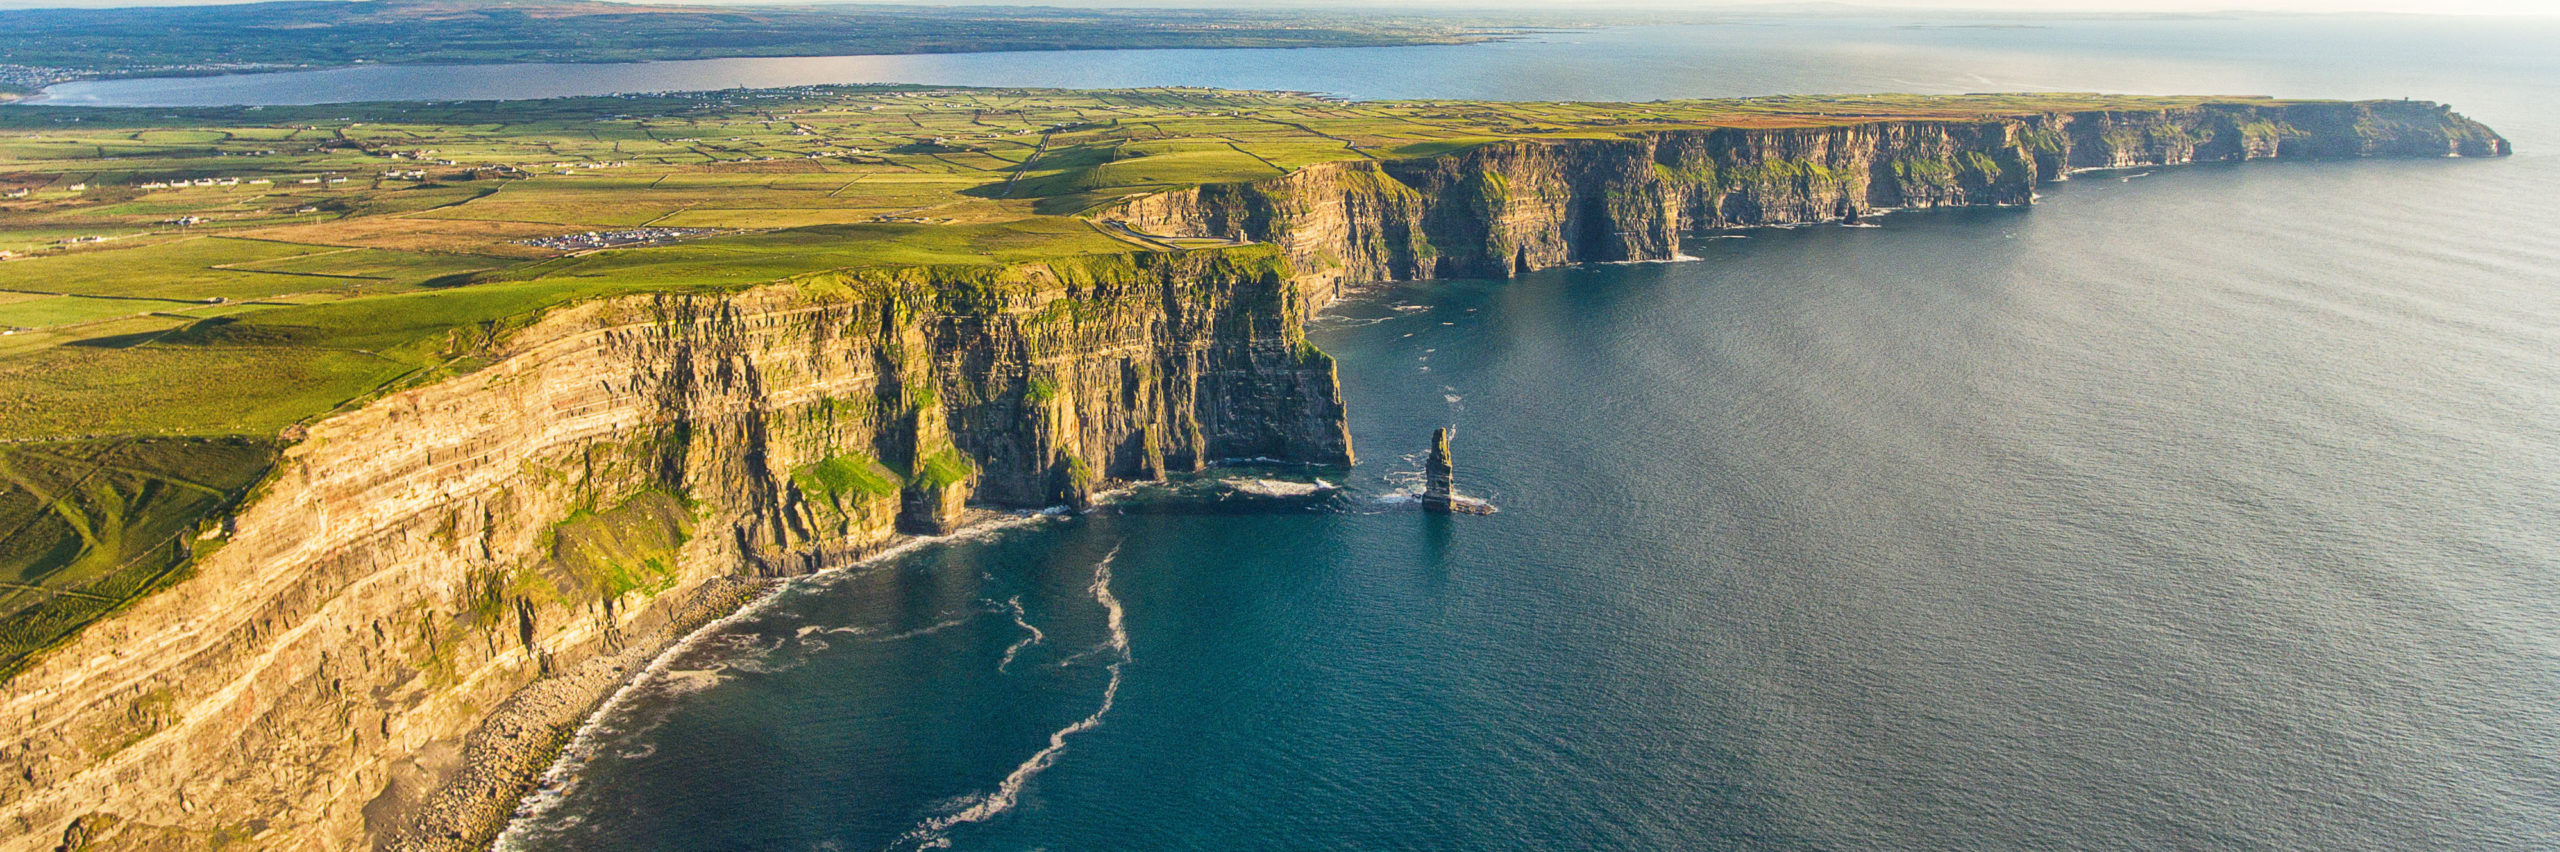 Aerial birds eye drone view from the world famous cliffs of moher in county clare ireland. Scenic Irish rural countryside nature along the wild atlantic way and European Atlantic Geotourism Route - Image [Shutterstock]